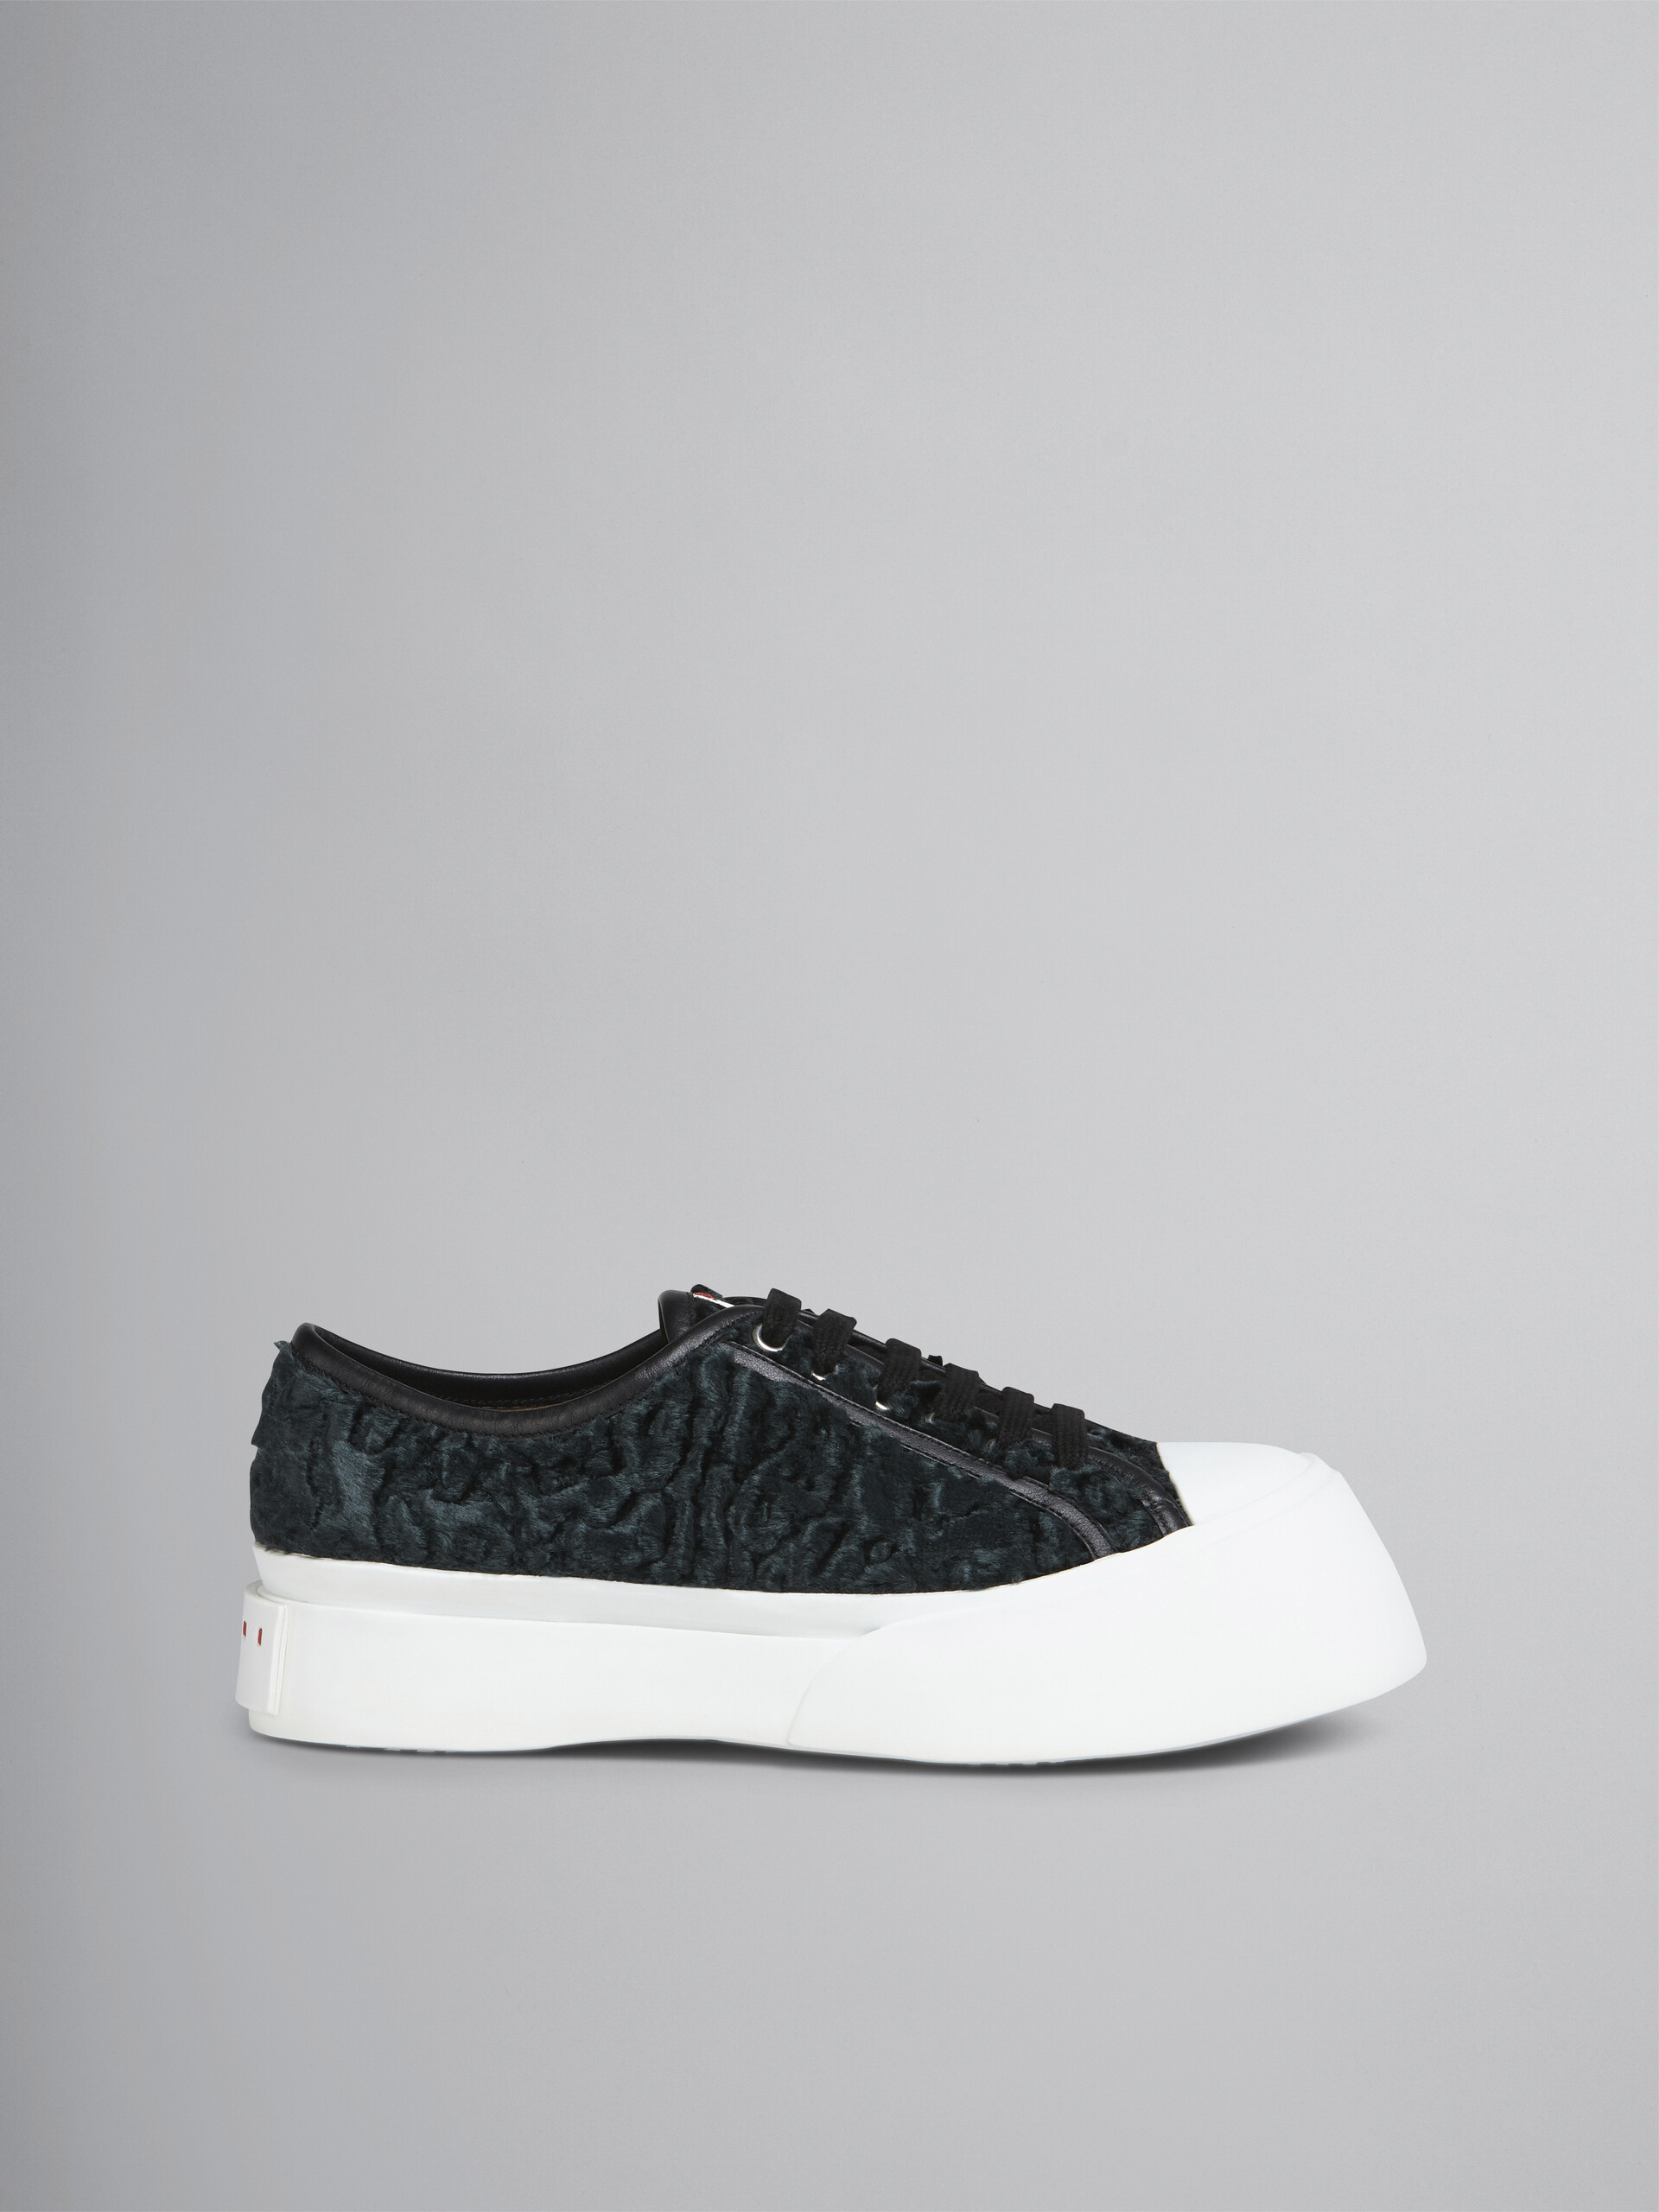 Black curly fabric PABLO lace-up sneaker - Sneakers - Image 1